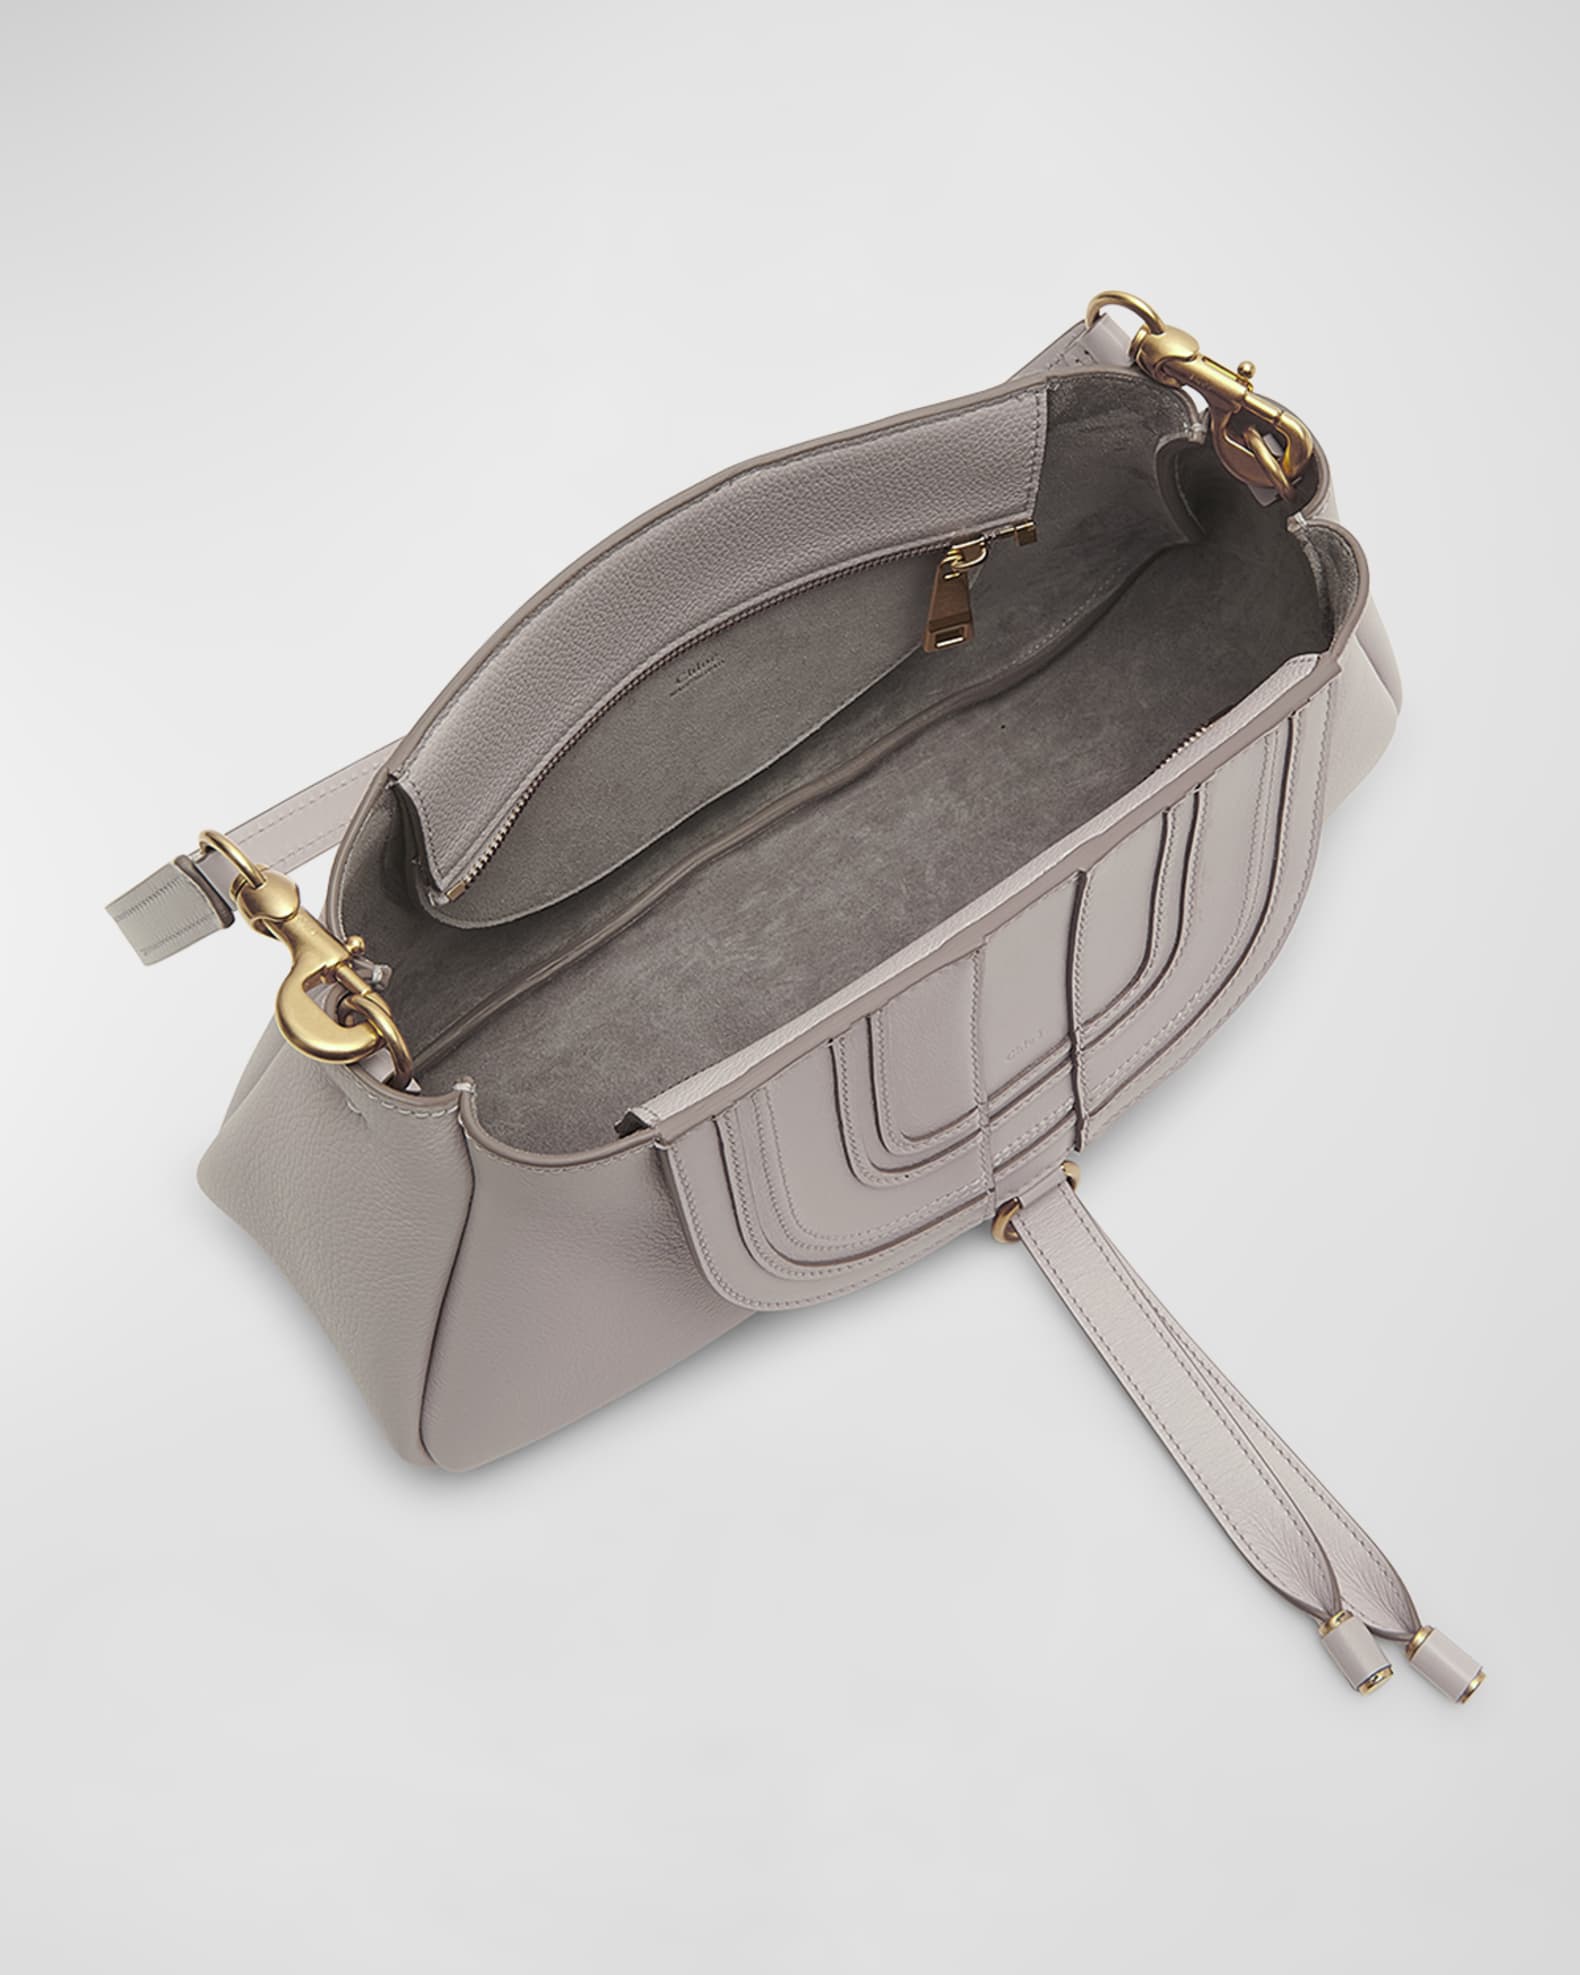 Chloe Marcie Bag Review - Exclusive Design & Save 15% - Fashion For Lunch.